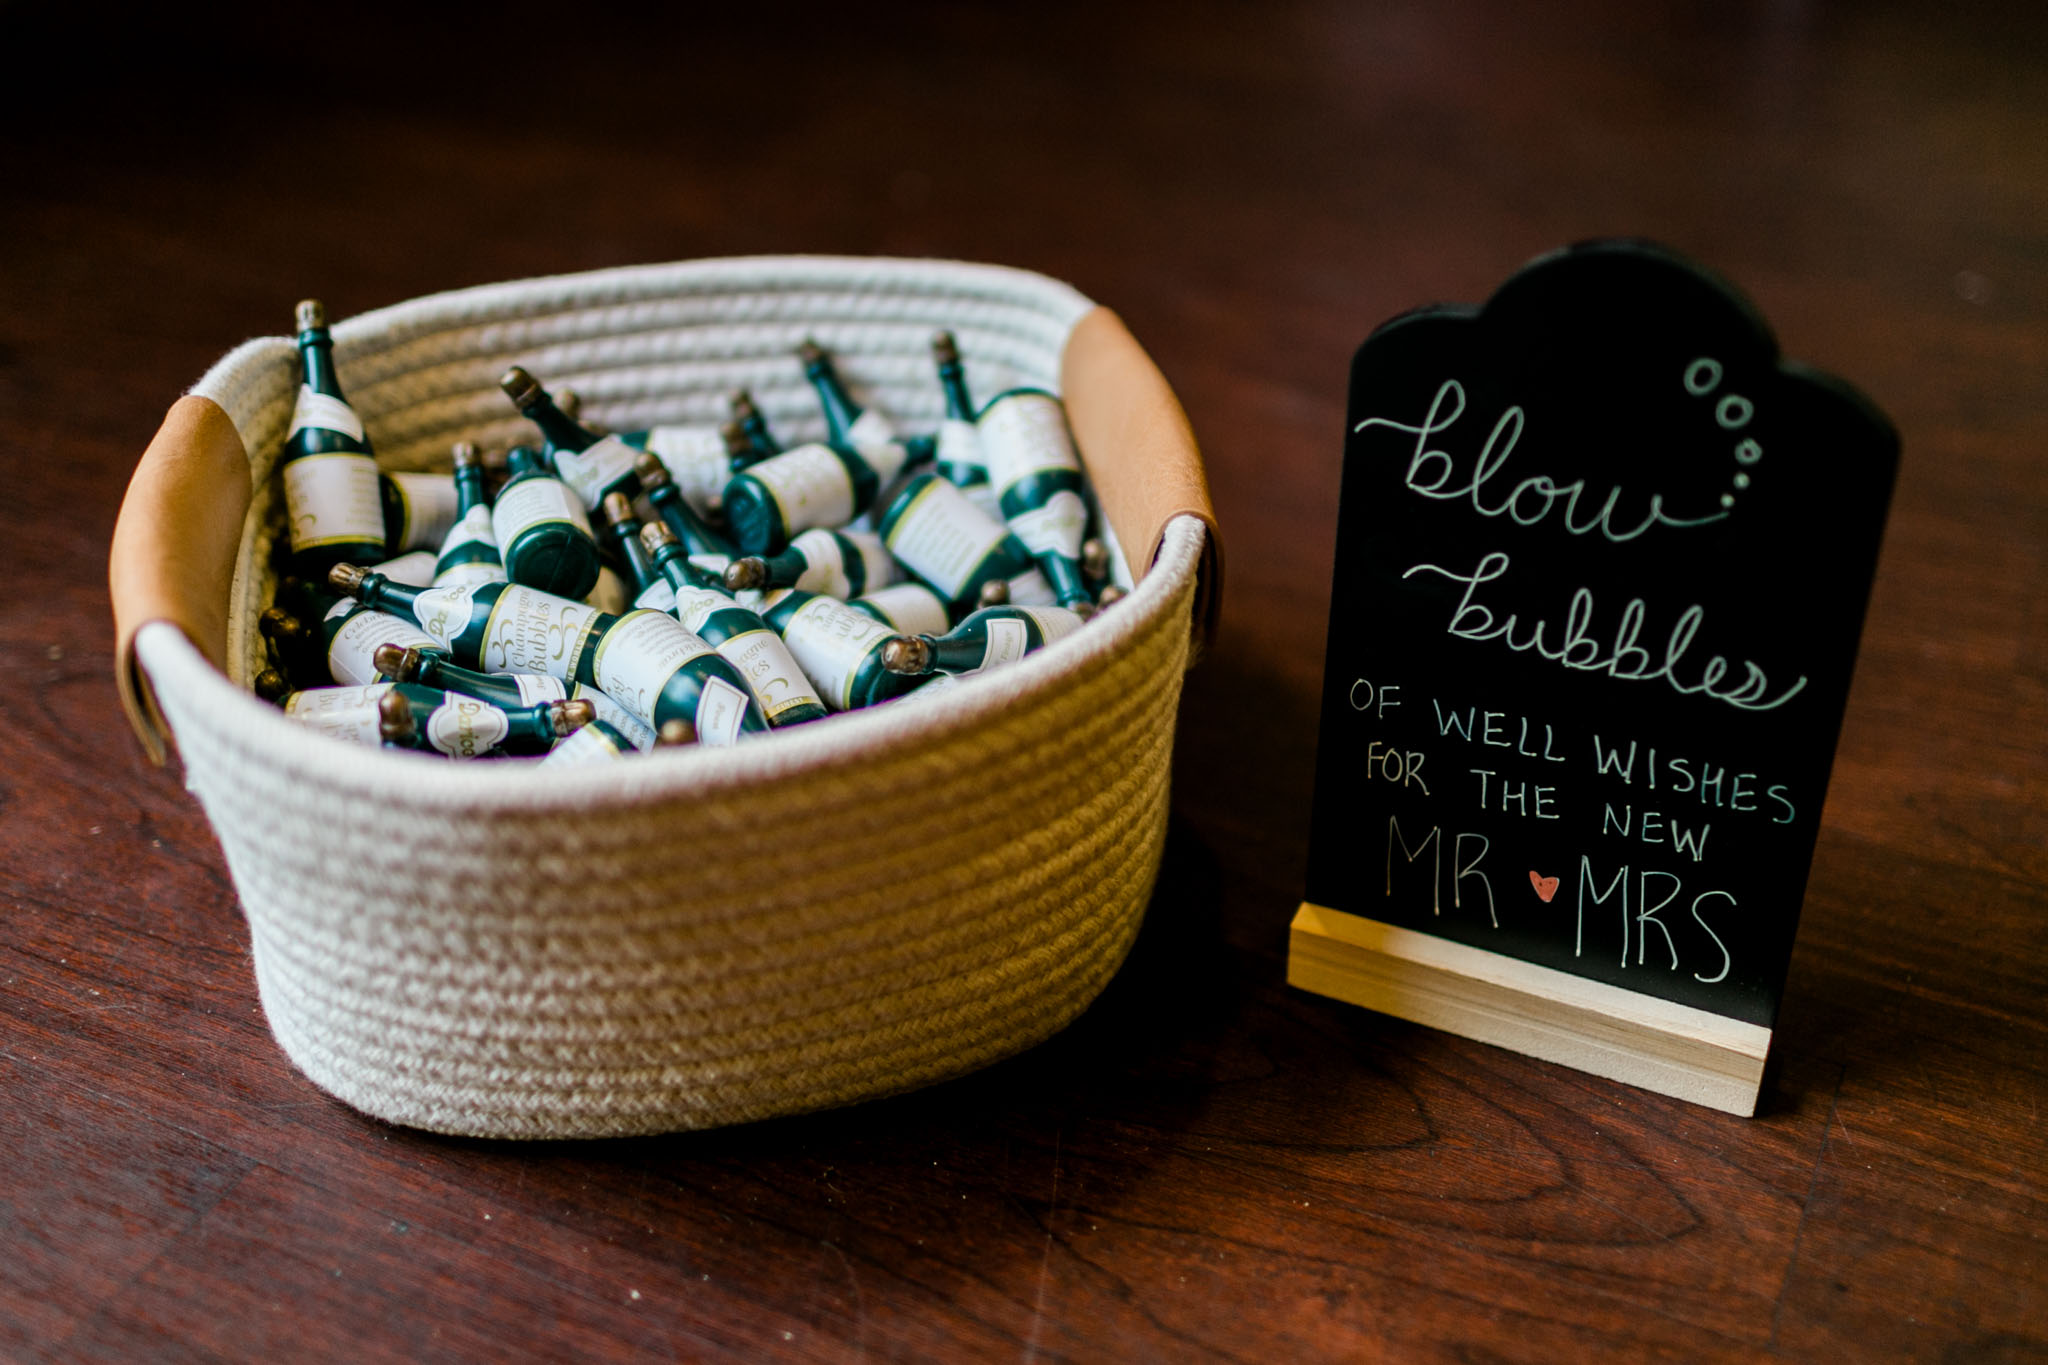 Basket with bubbles for wedding sendoff | Raleigh Wedding Photographer | By G. Lin Photography